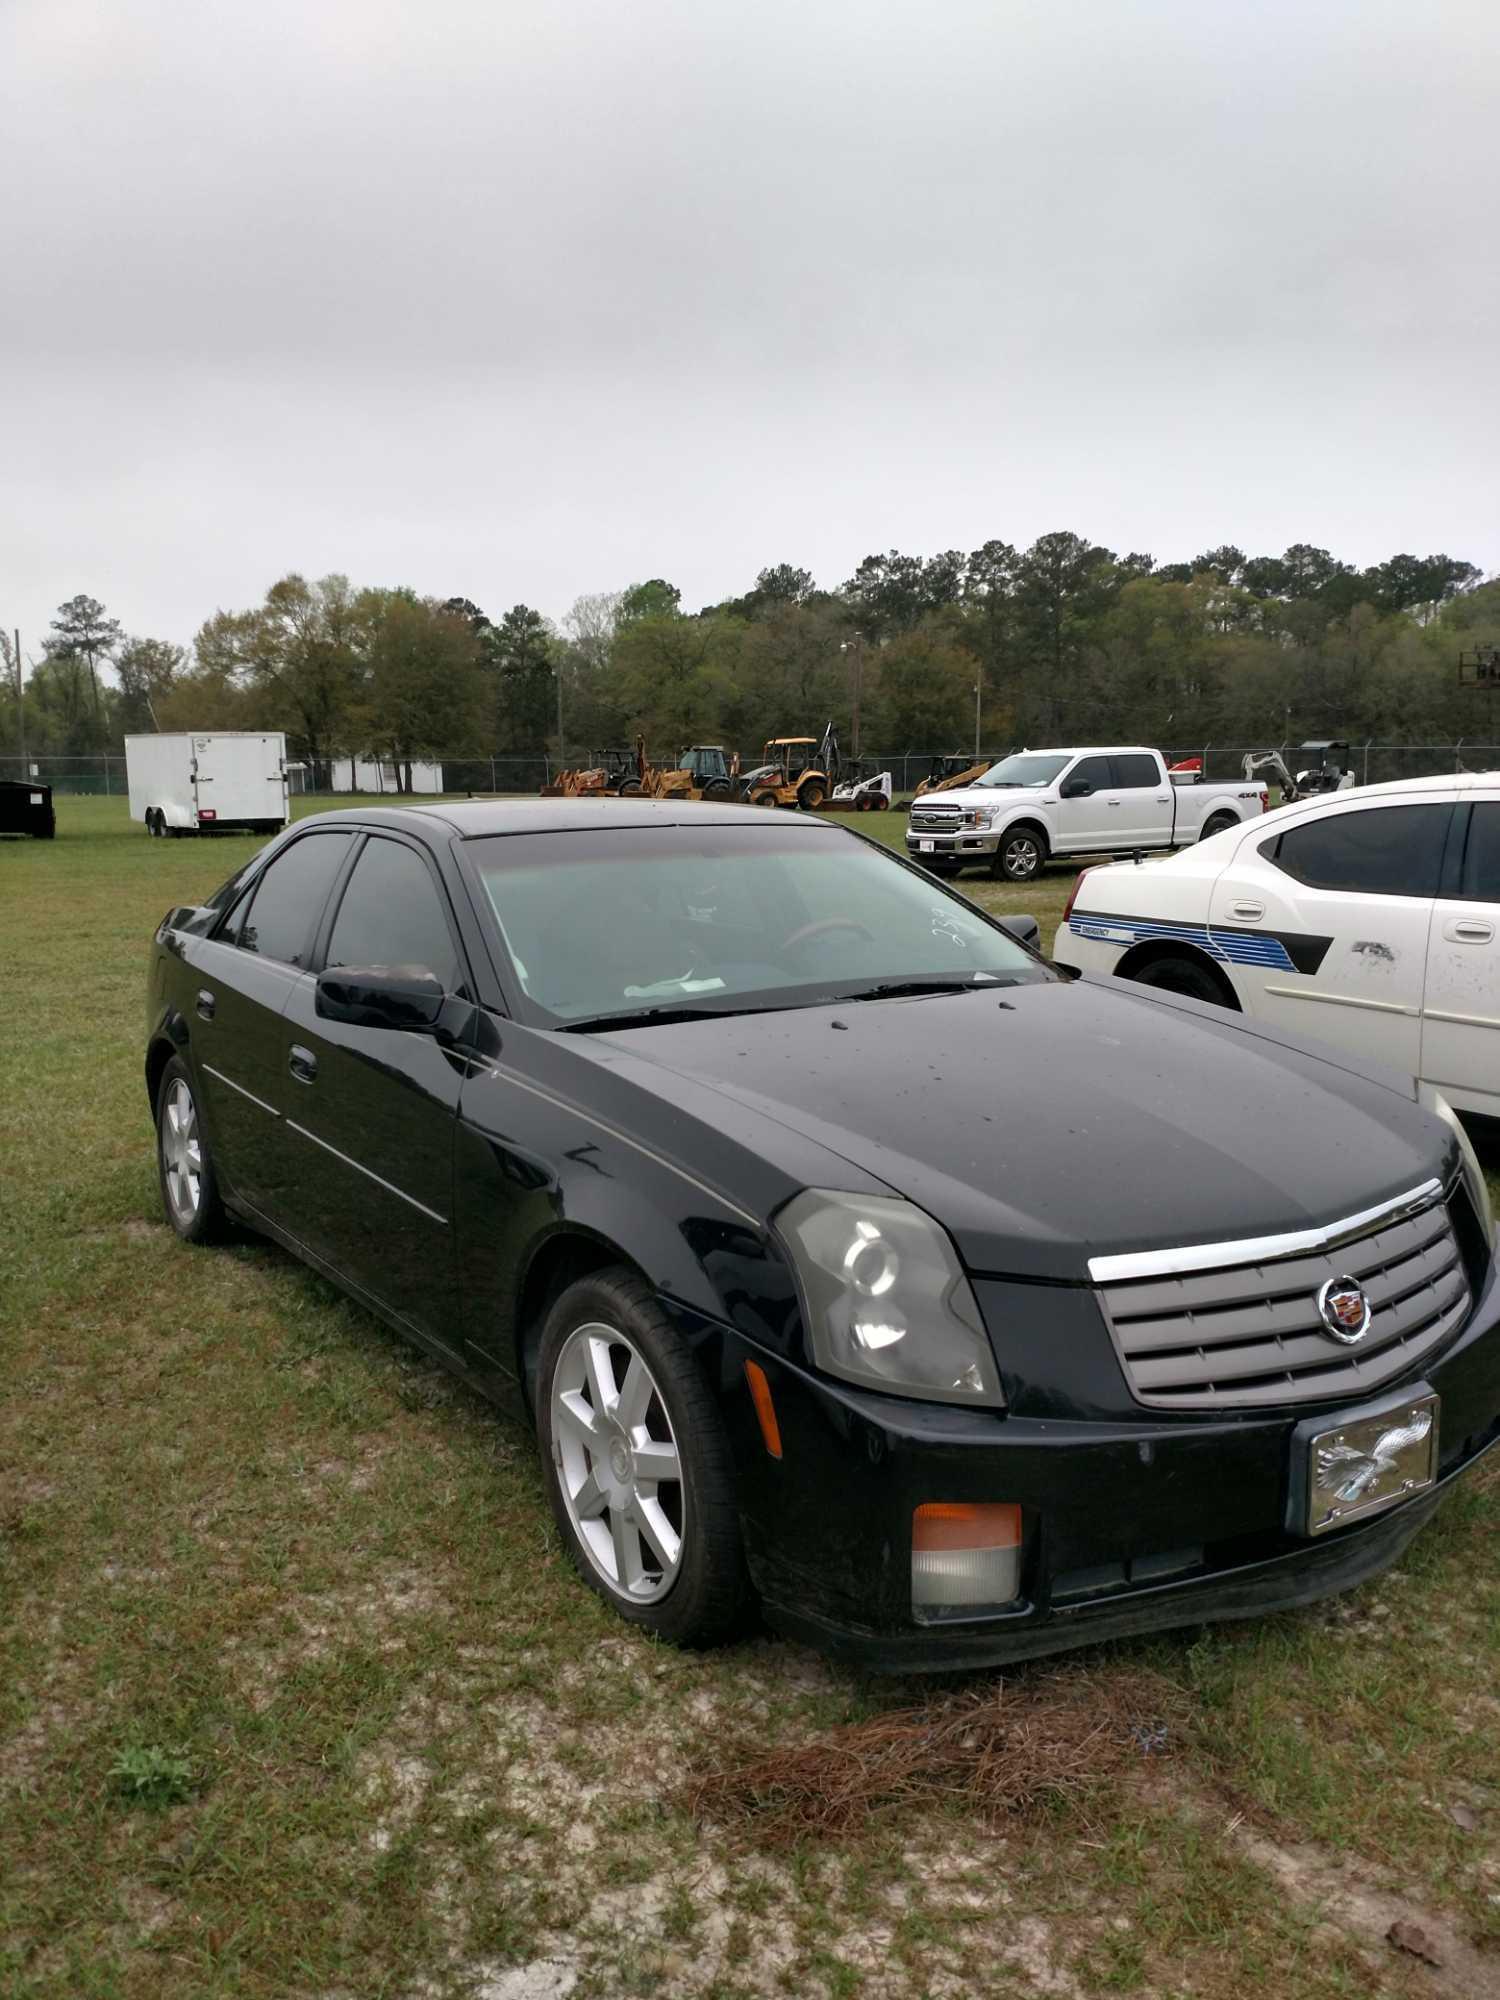 ABSOLUTE 2005 CADILLAC CTS